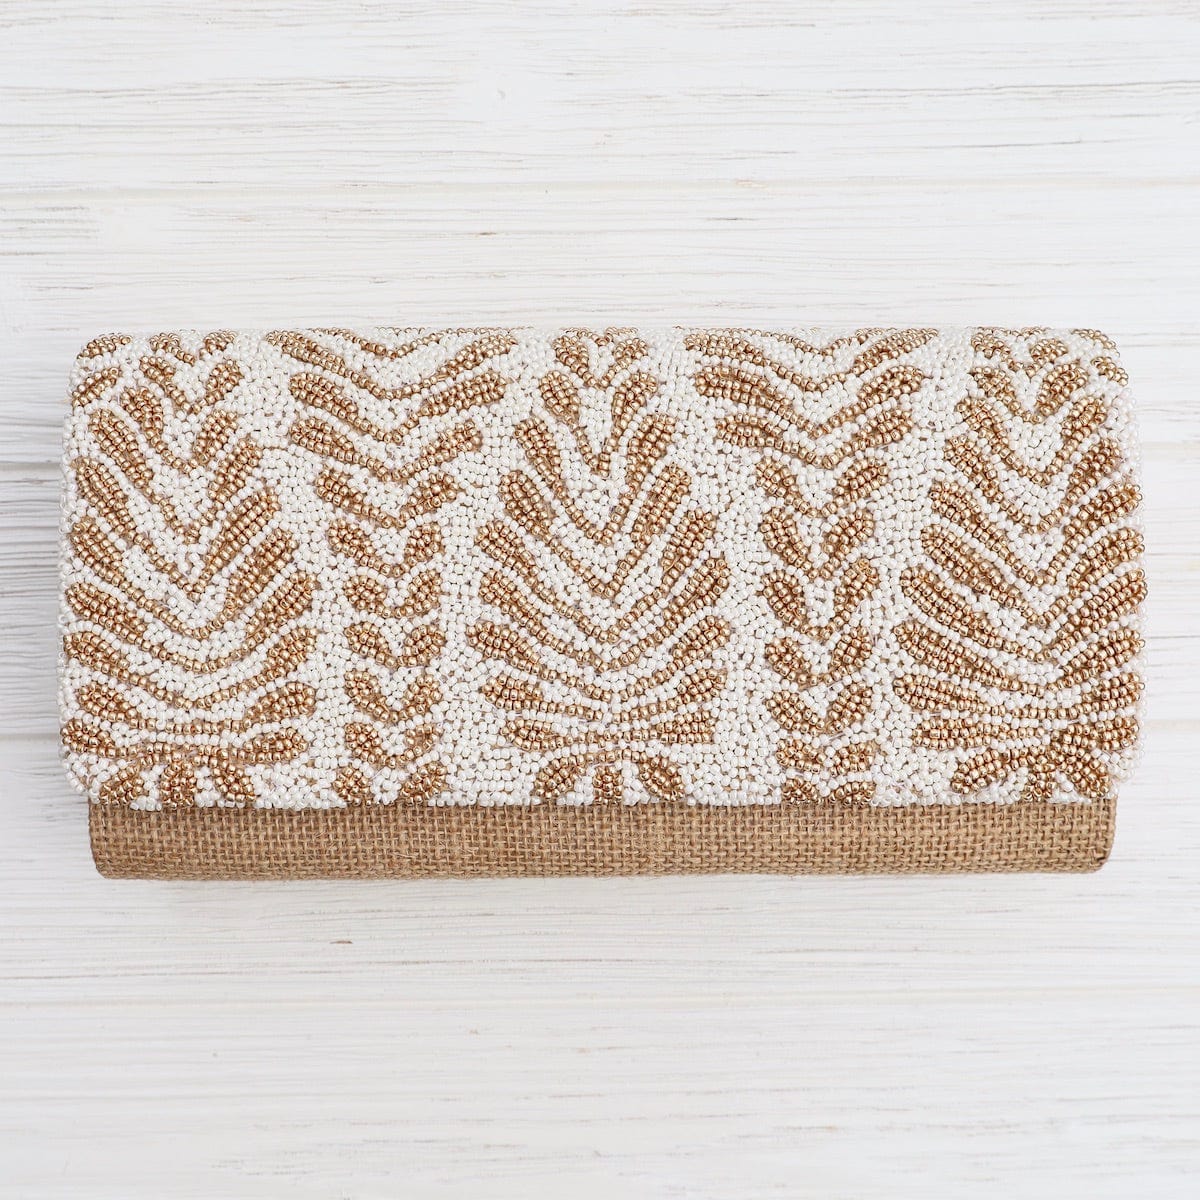 BAG Half Flap Natural Clutch in Beaded Ivory and Gold